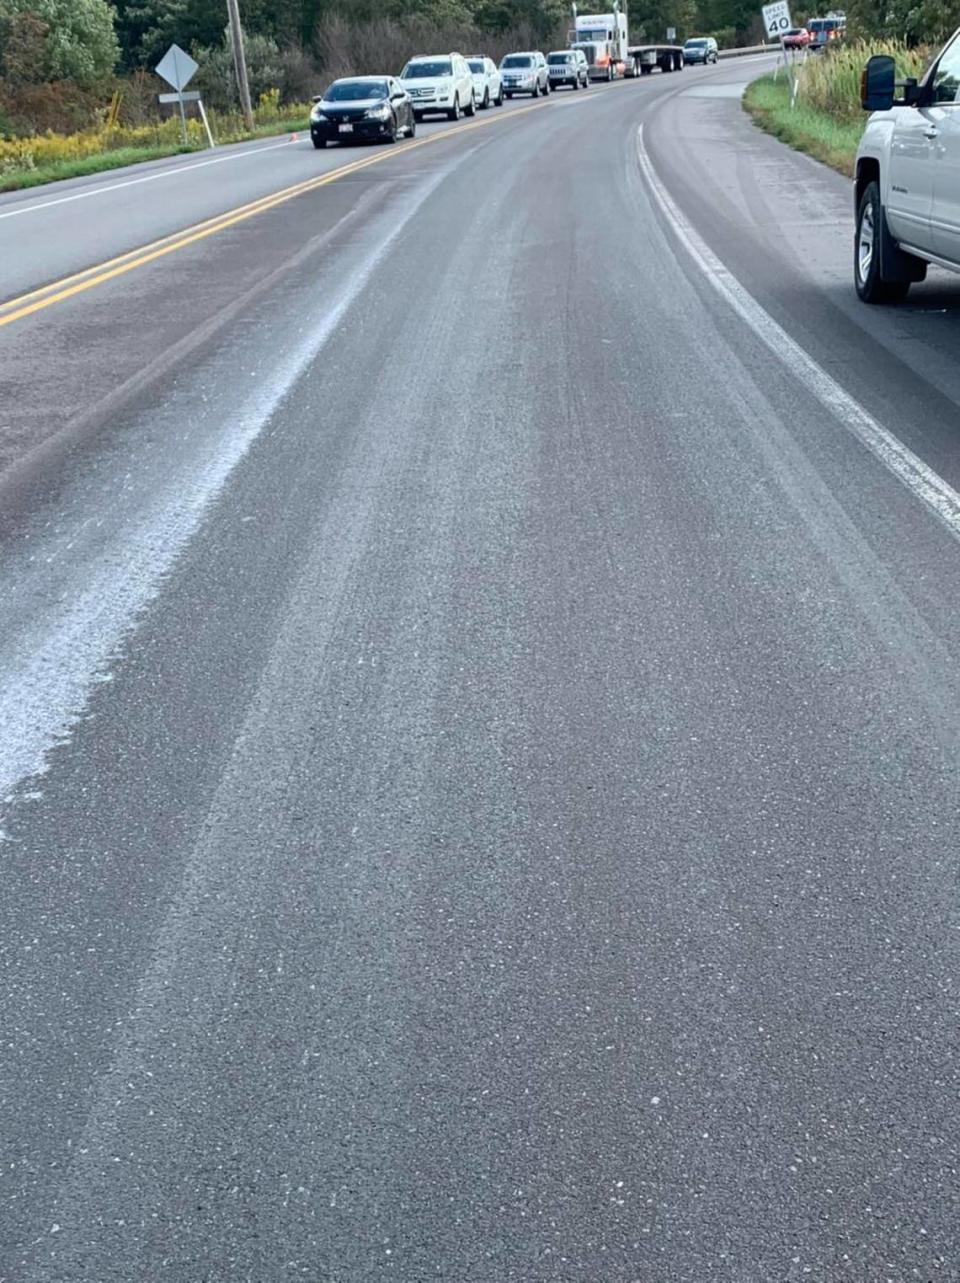 Hope Fire Company, PennDOT and the Philipsburg Borough all responded Monday morning to an incident involving a tractor trailer that spilled an estimated several dozen gallons of heavy coffee creamer on to Route 322, making for “extremely slippery” conditions.